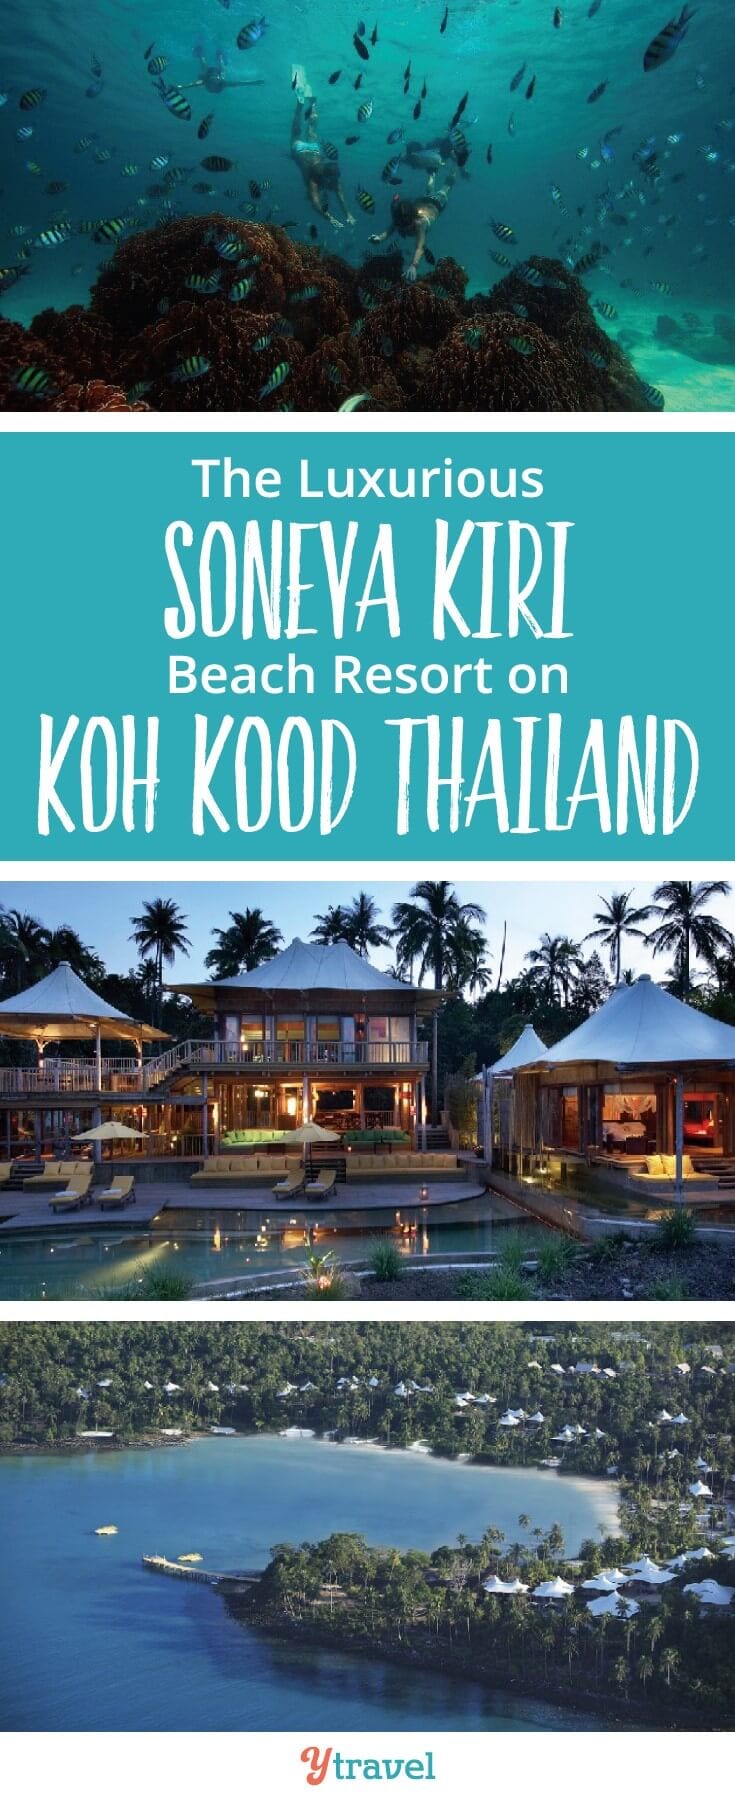 Want an unspoilt Thai island location? We've found the perfect Koh Kood Beach resort for families. Yes, it's a luxury resort! The Soneva Kiri Beach Resort on Ko Kood Thailand is just the family escape you've been dreaming of. #Thailand #KohKood #familytravel #luxurytravel #resorts